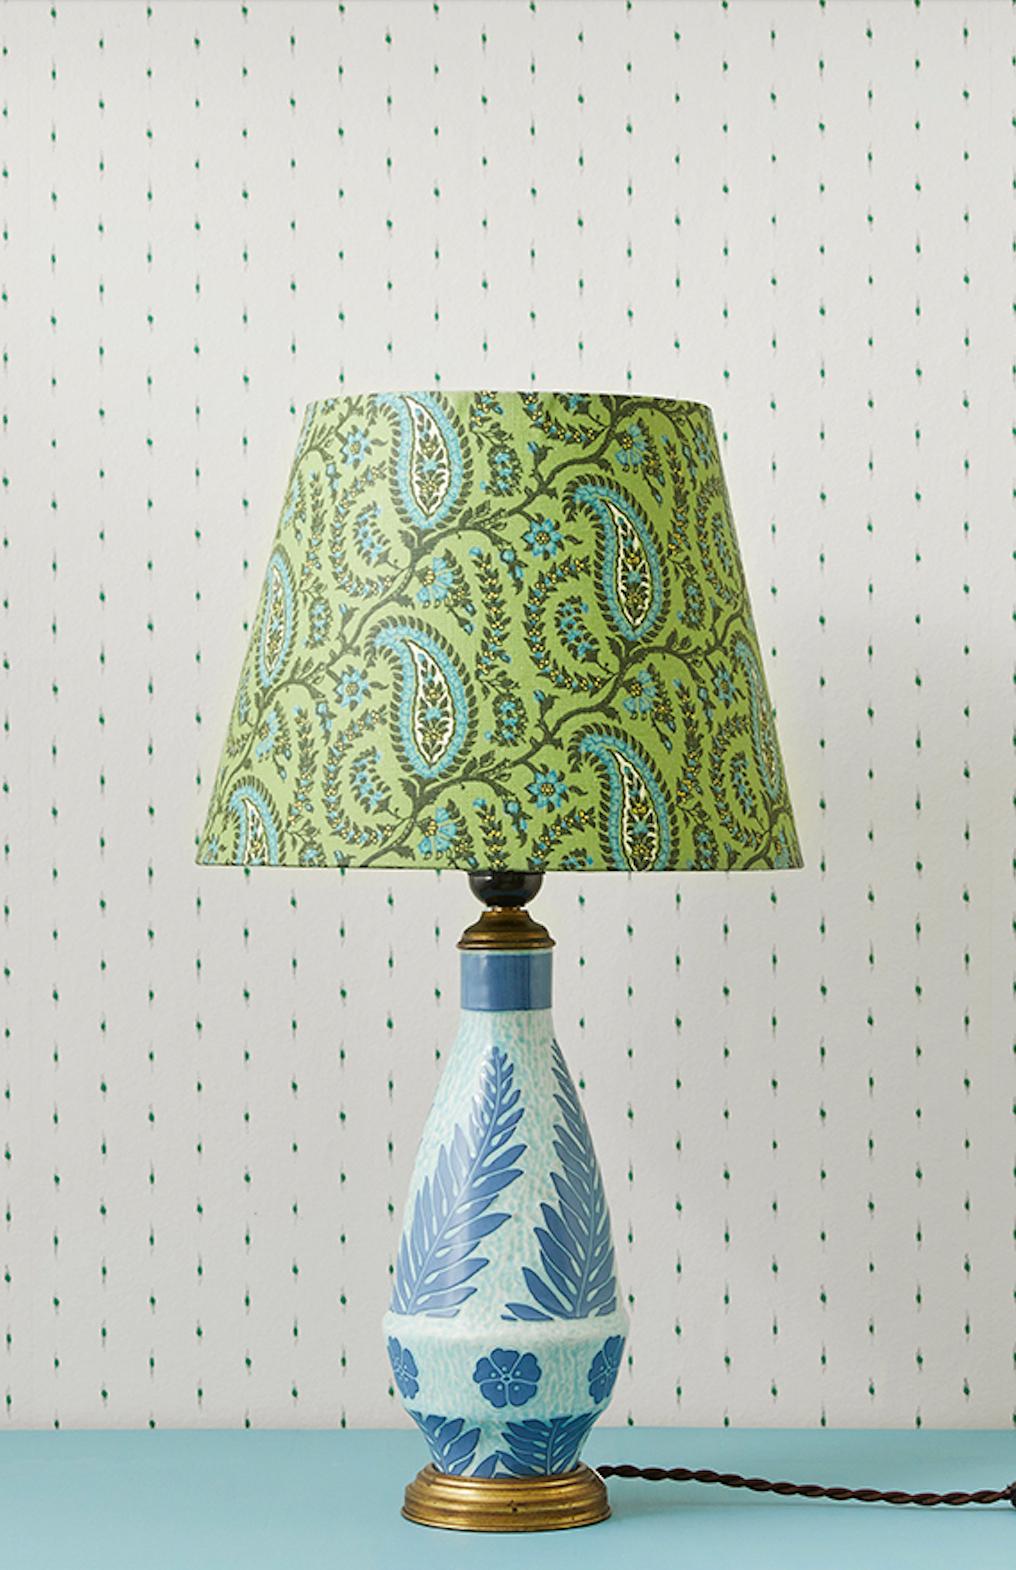 Josef Ekberg
Sweden, early 19th Century

Ceramic table lamp with customised shade by The Apartment.

H 56 x Ø 28 cm